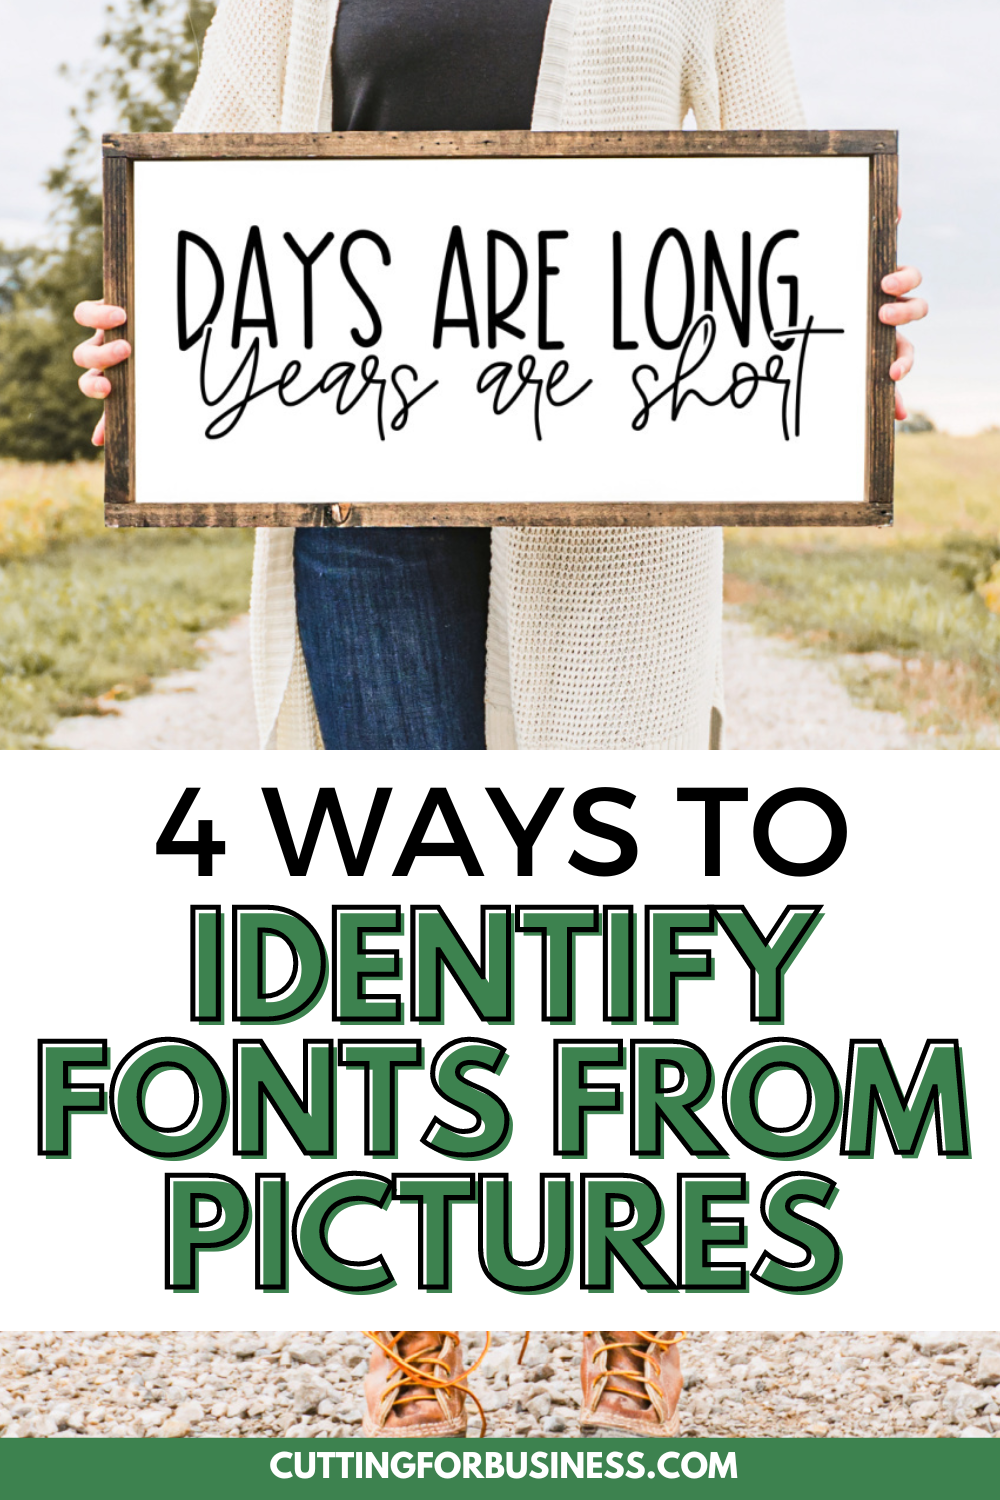 4 Ways to Identify Fonts from Pictures - cuttingforbusiness.com.